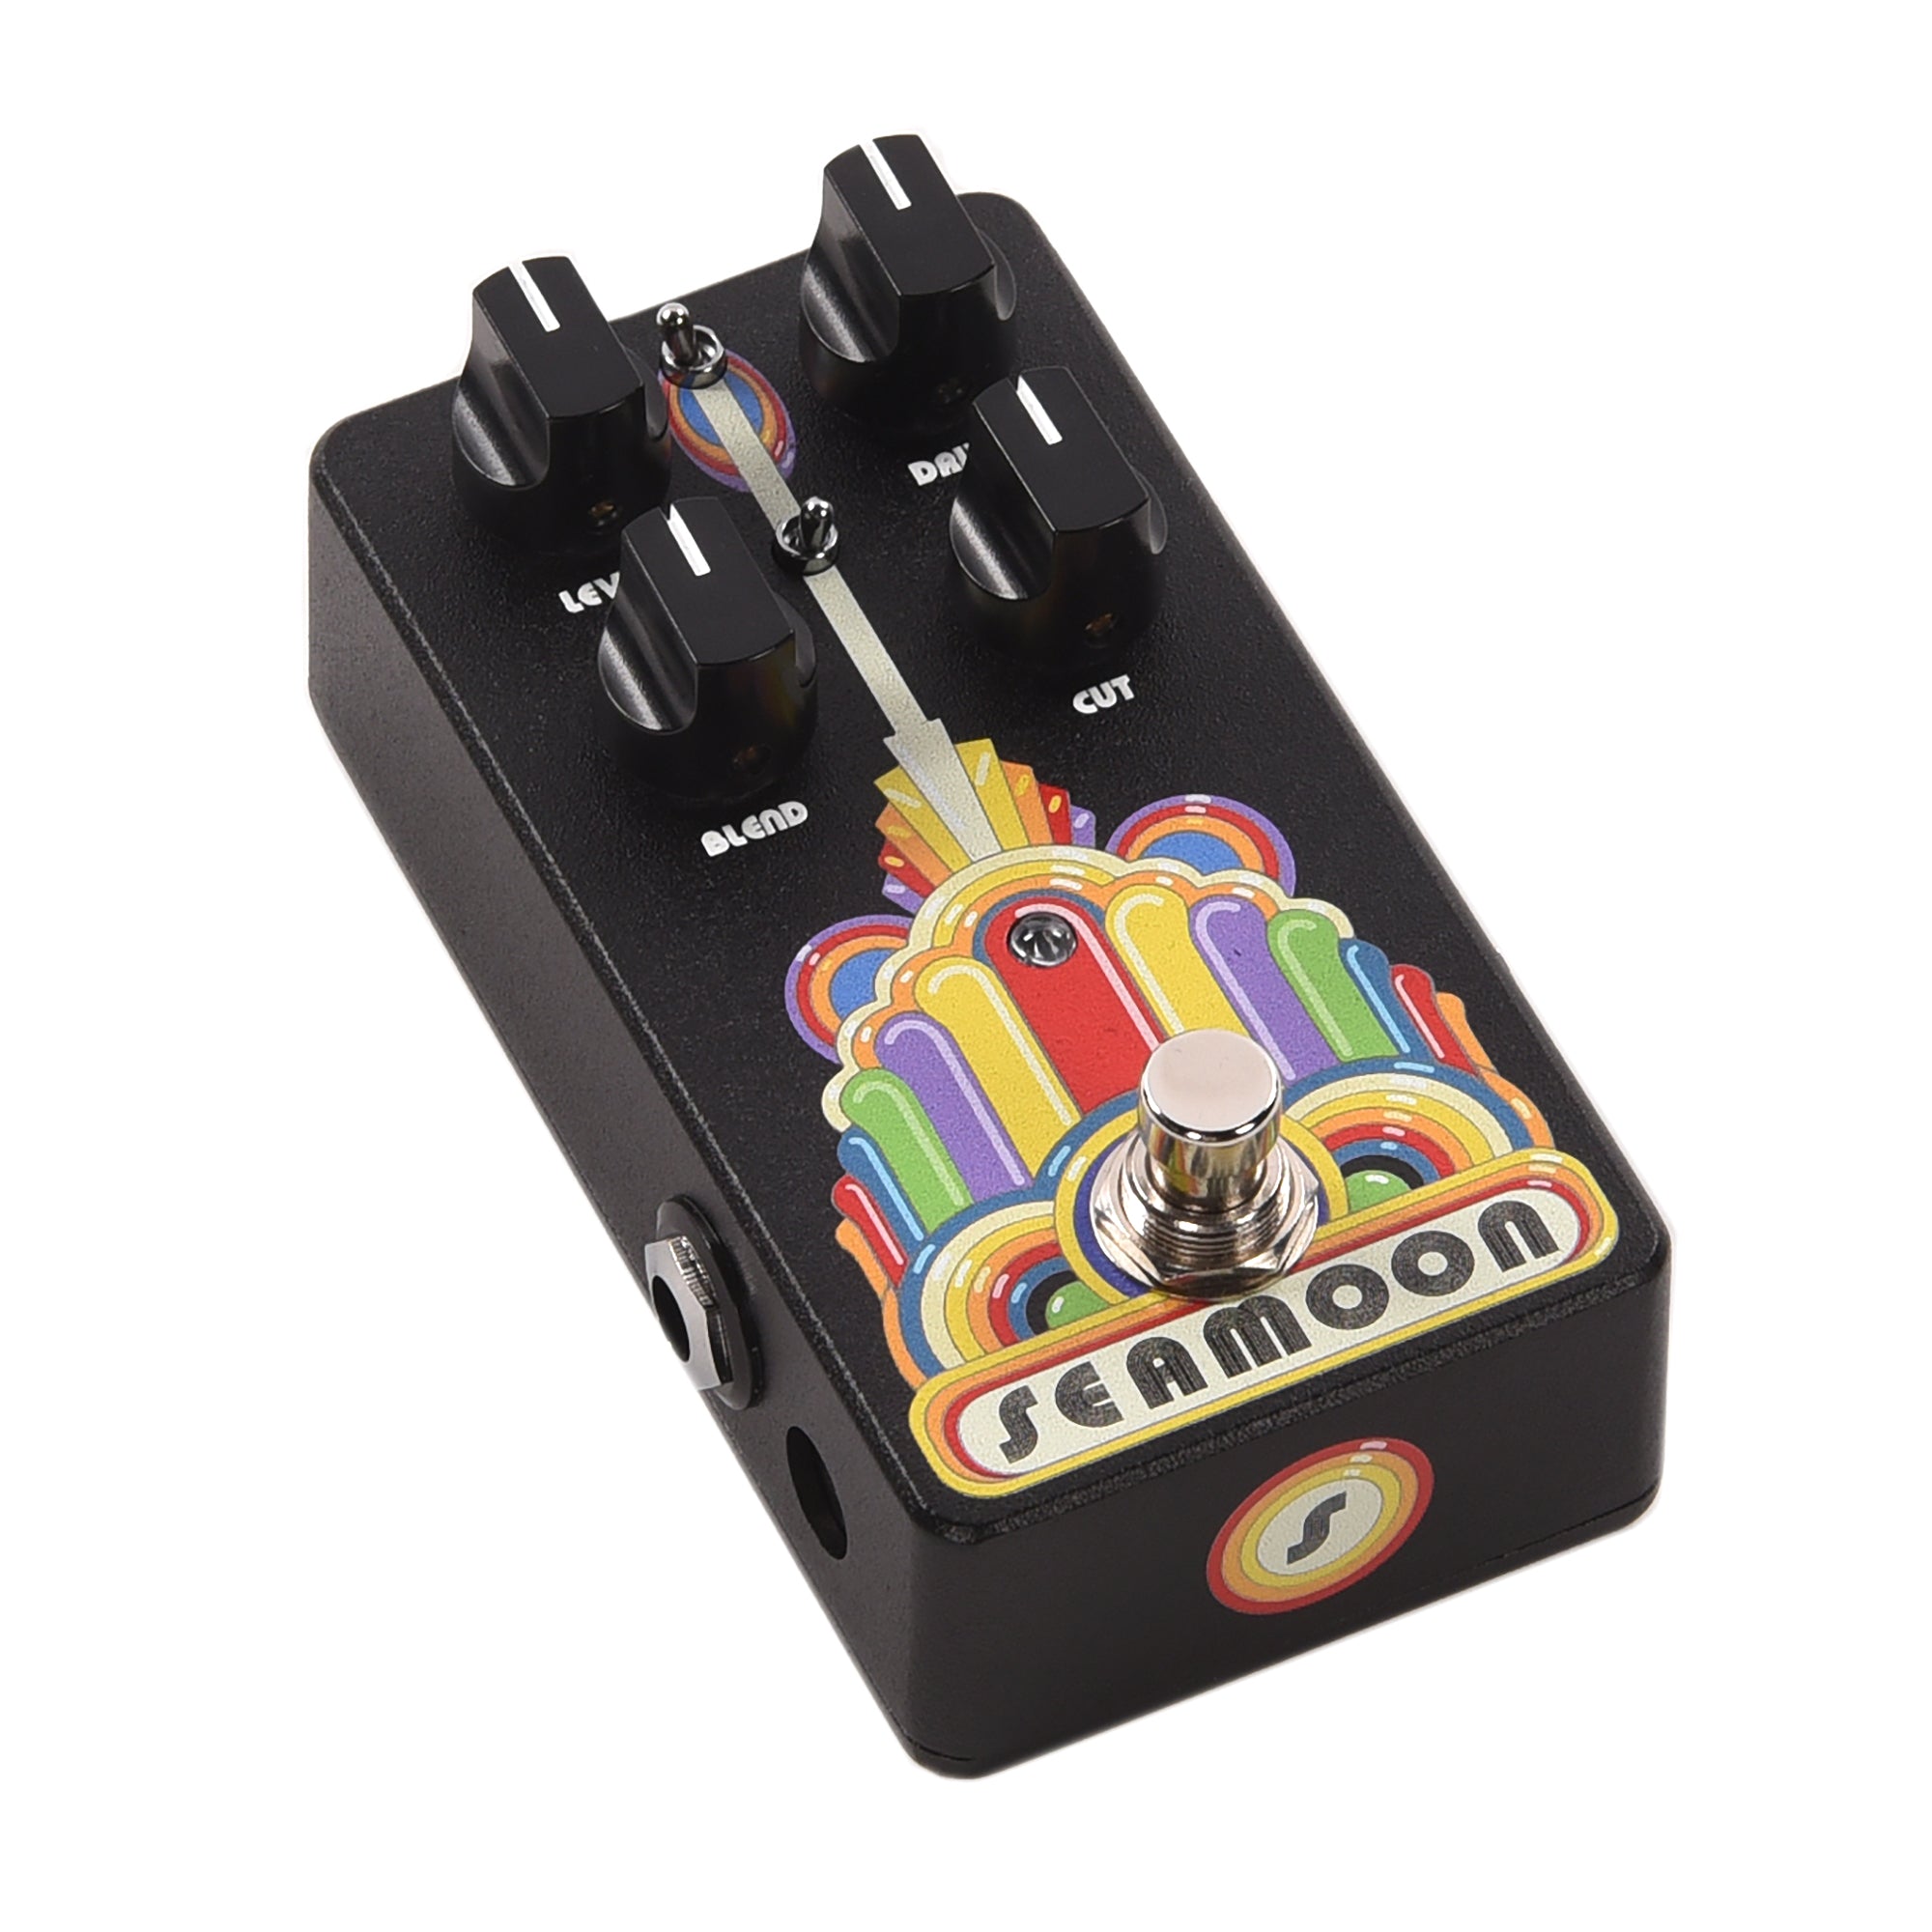 Seamoon Grind Machine Bass Distortion/Overdrive Pedal